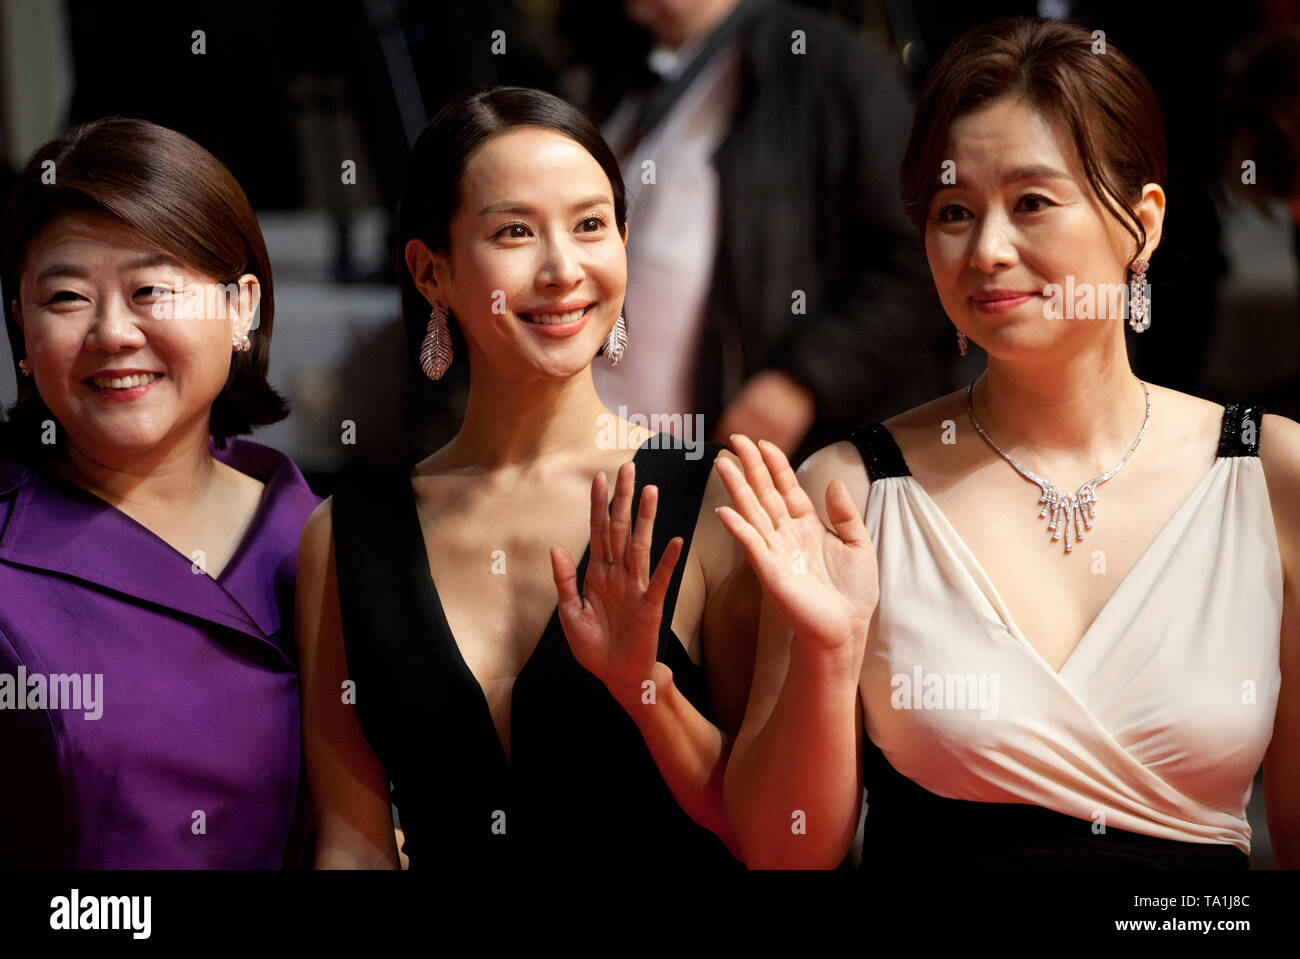 Cannes, France. 21st May 2019. Lee Jung-Eun, Cho Yeo-Jeong and Chang Hyae-Jin at the Parasite gala screening at the 72nd Cannes Film Festival Tuesday 21st May 2019, Cannes, France. Photo Credit: Doreen Kennedy/Alamy Live News Stock Photo